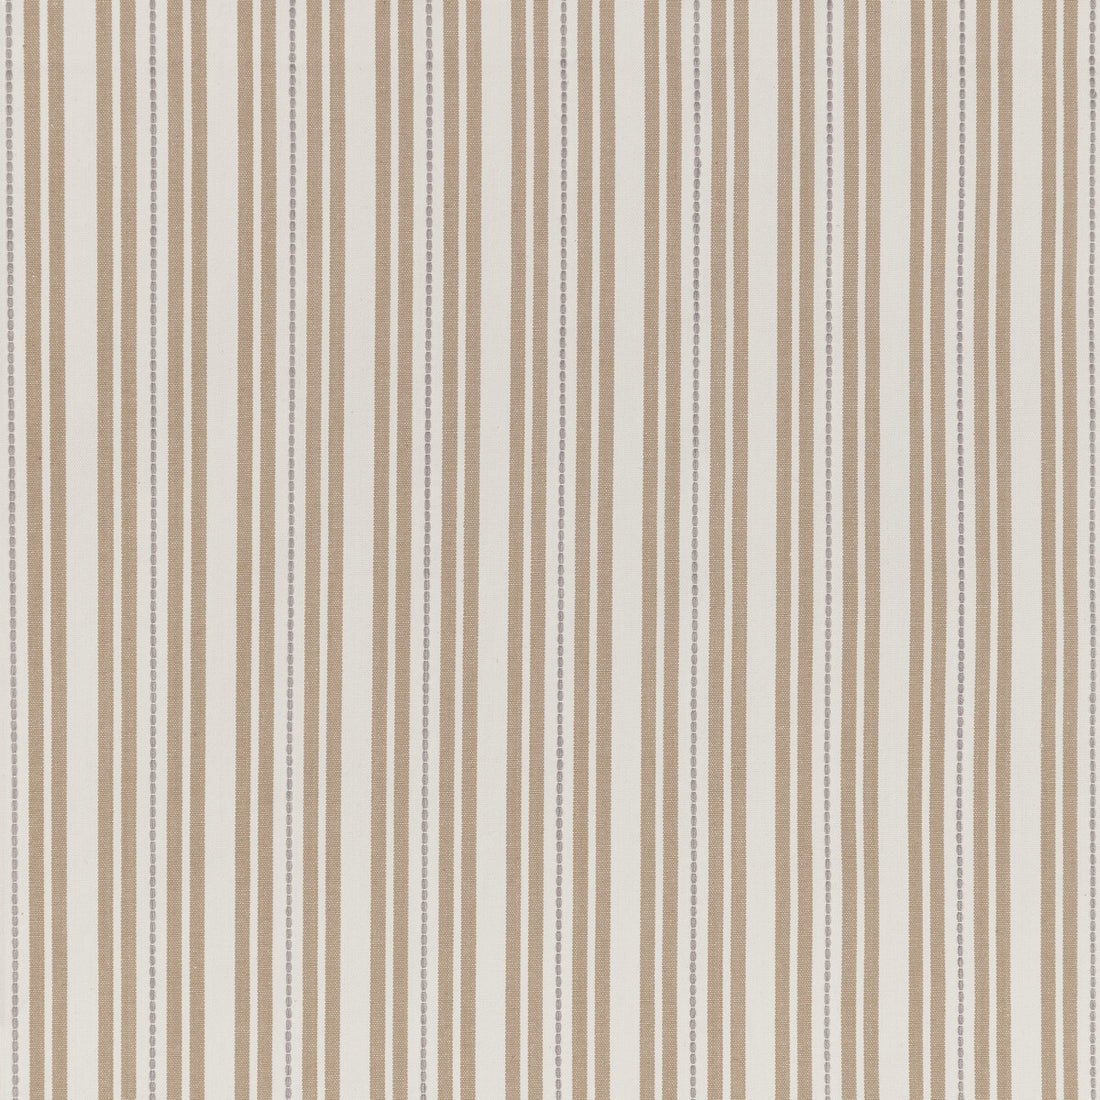 Basics fabric in 36046-16 color - pattern 36046.16.0 - by Kravet Basics in the L&